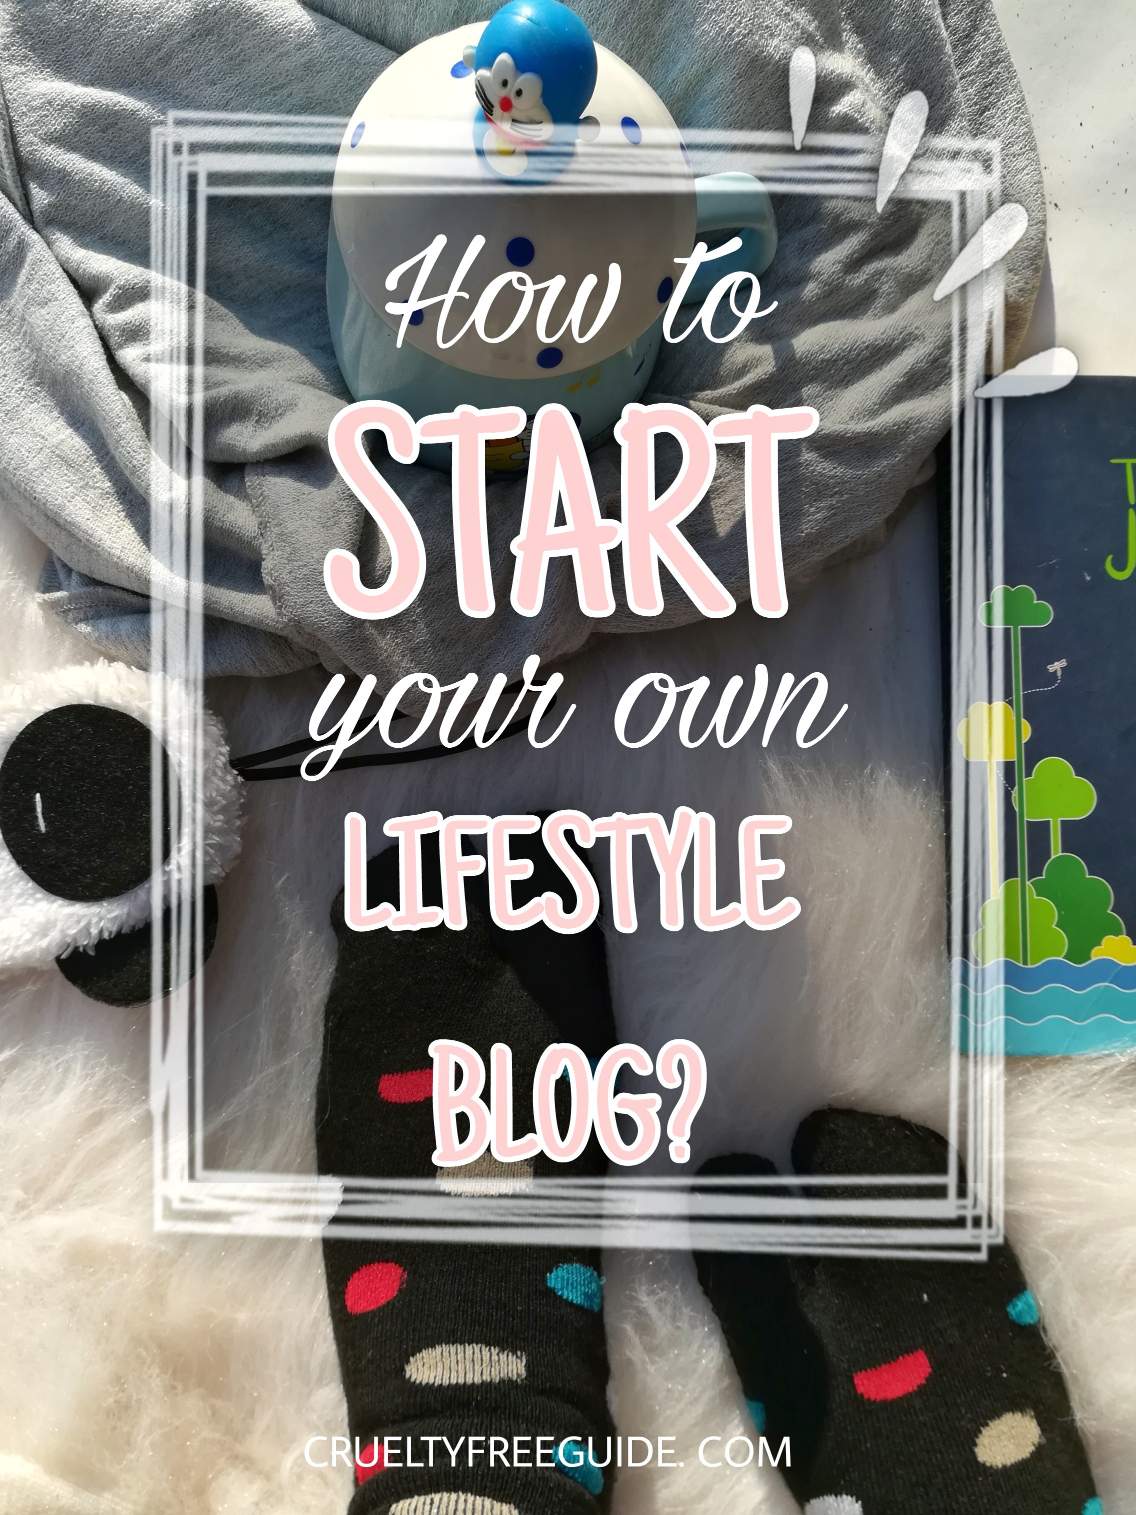 How to start a Lifestyle blog